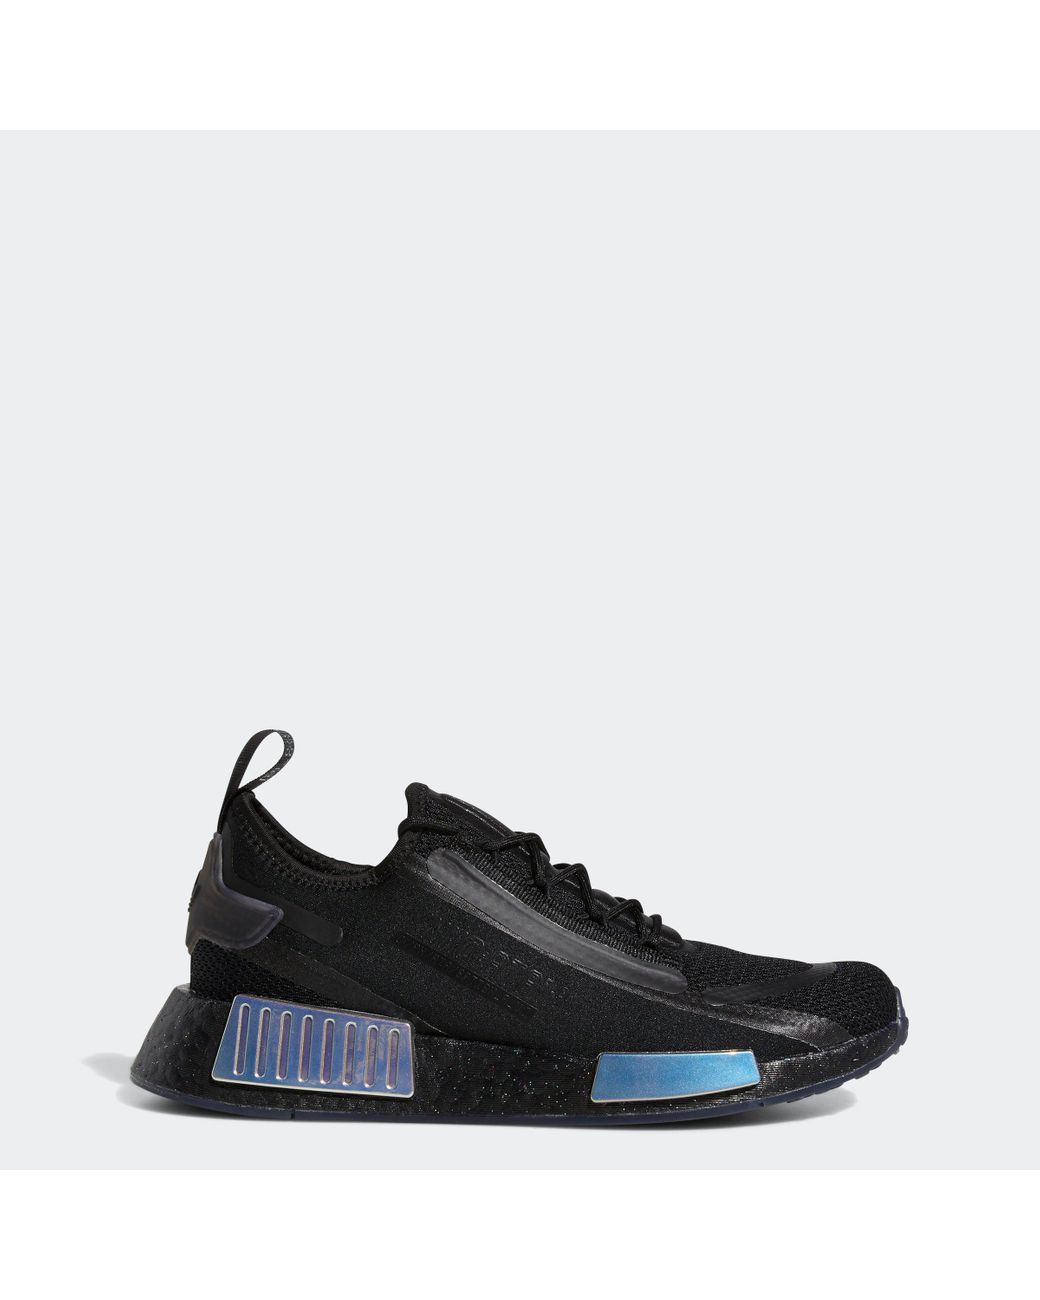 adidas Nmd_r1 Spectoo Shoes in Black | Lyst